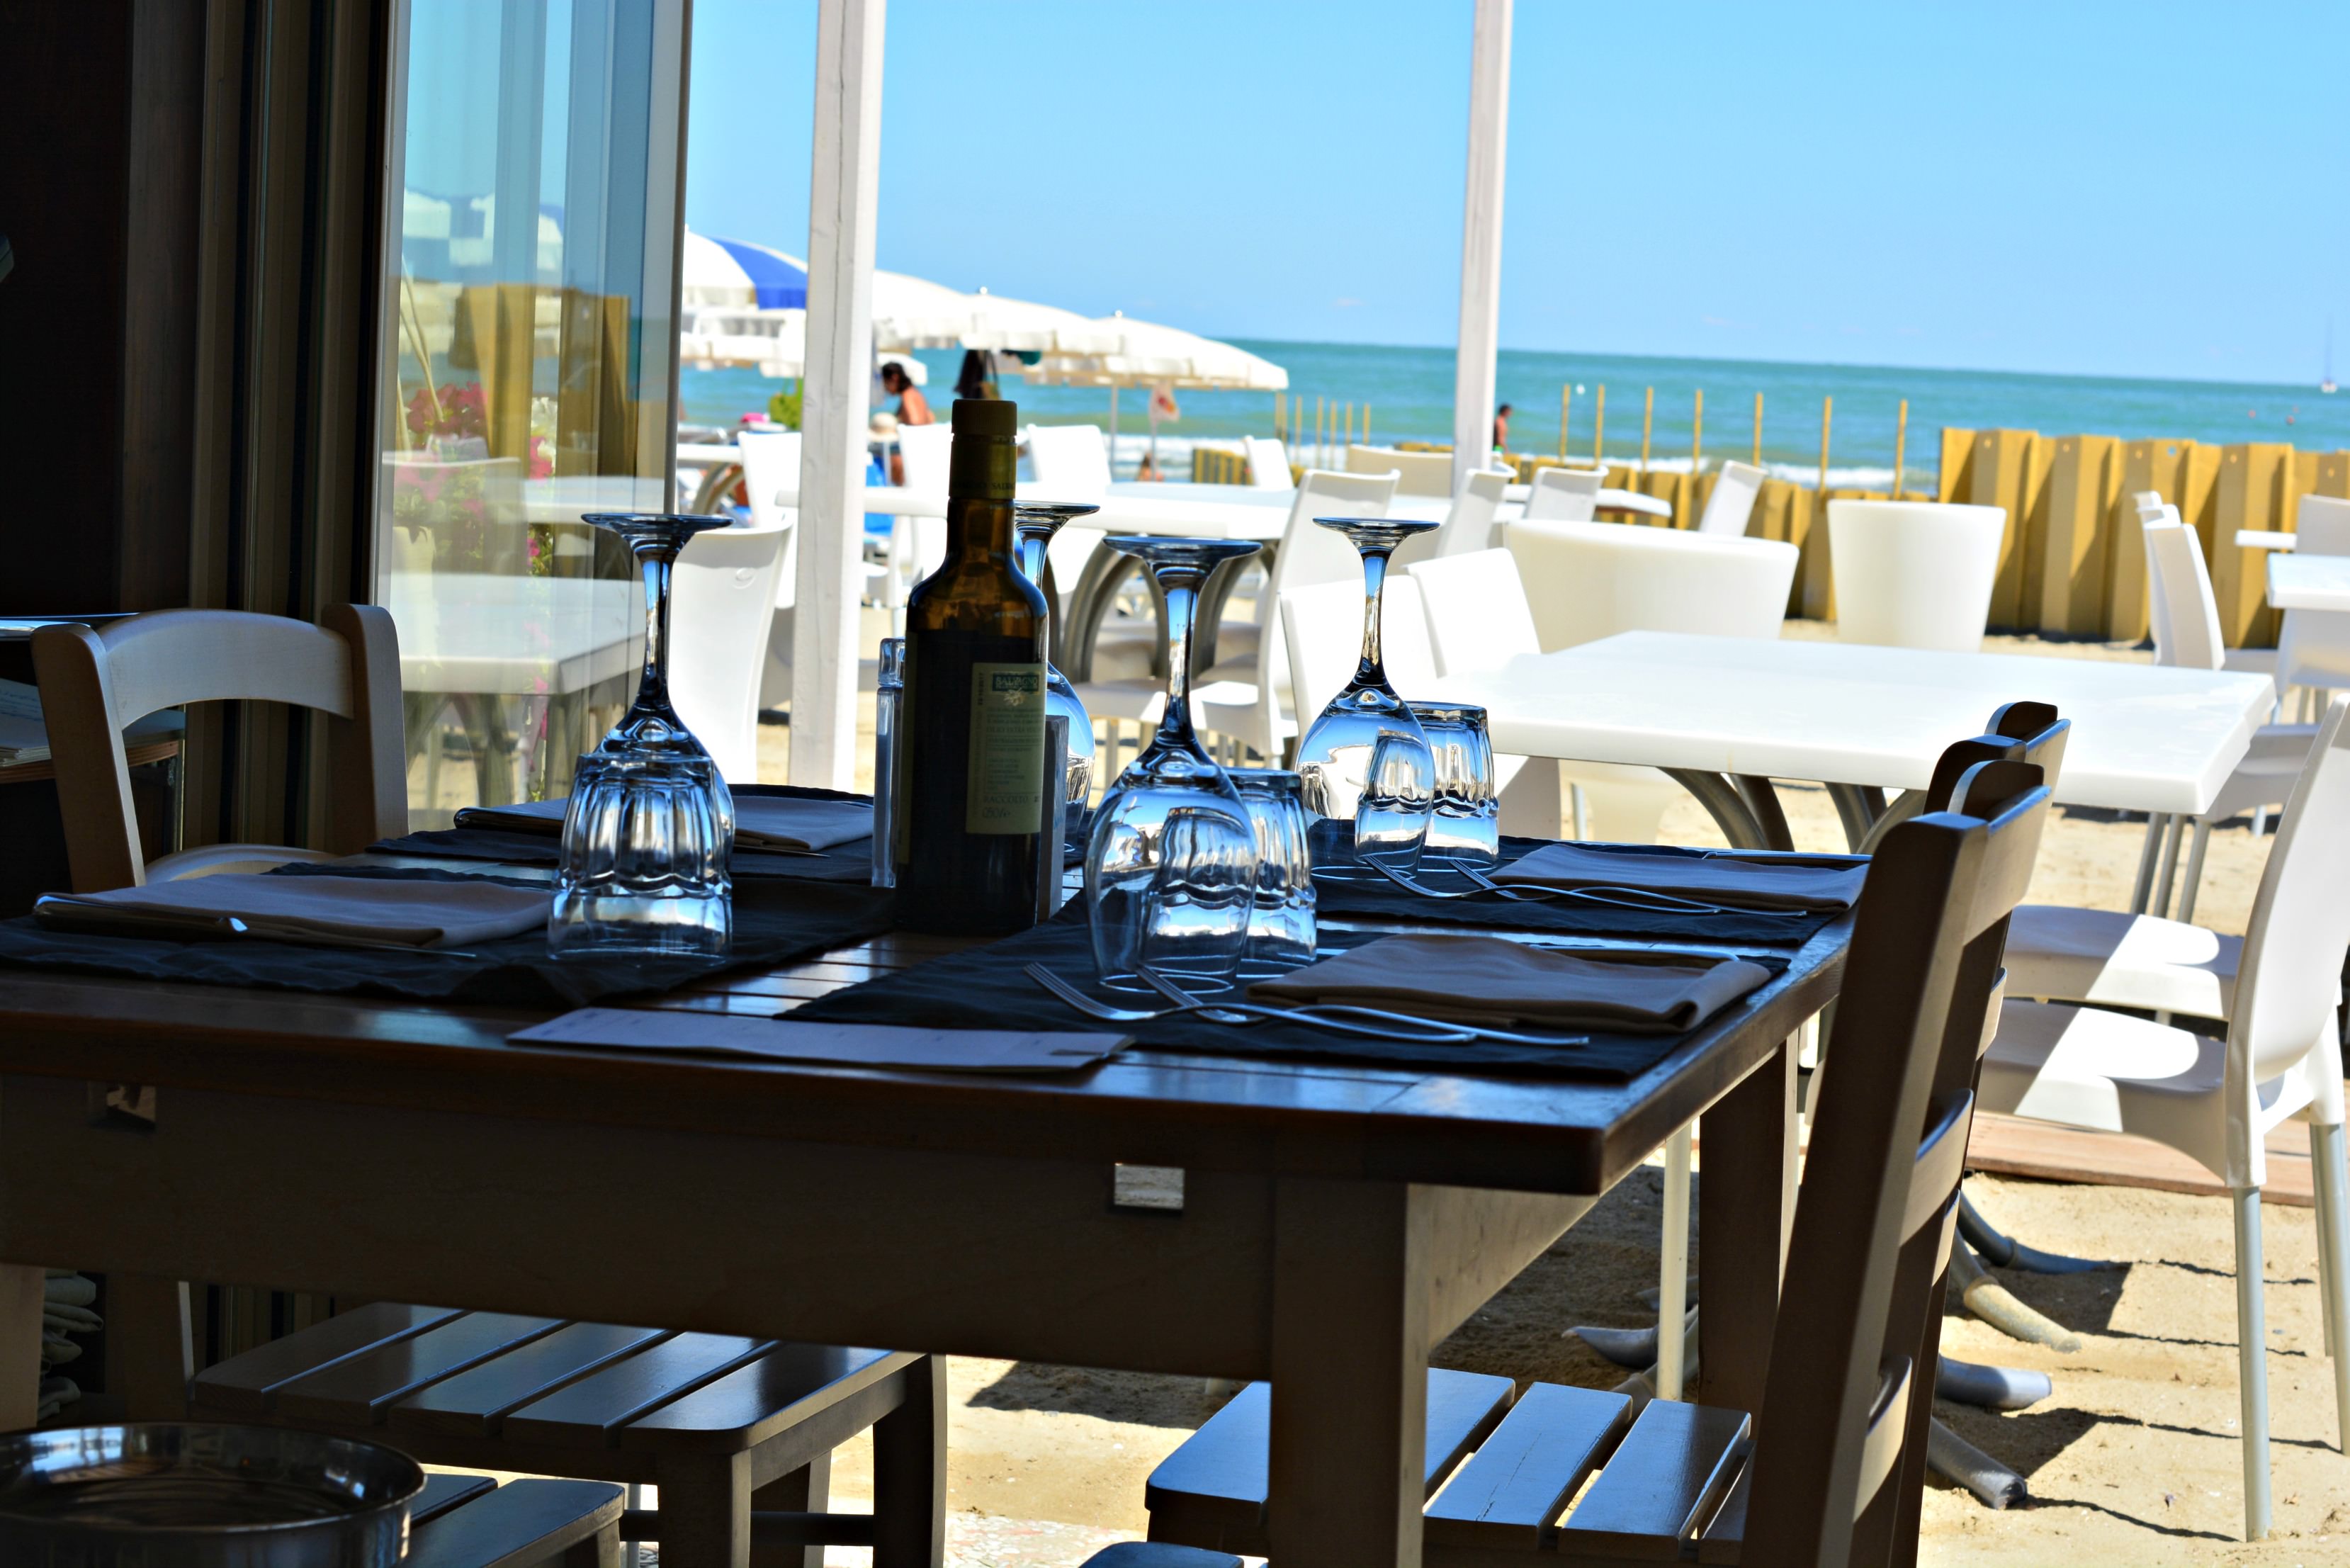 Amazing Restaurants at the beach in Italy